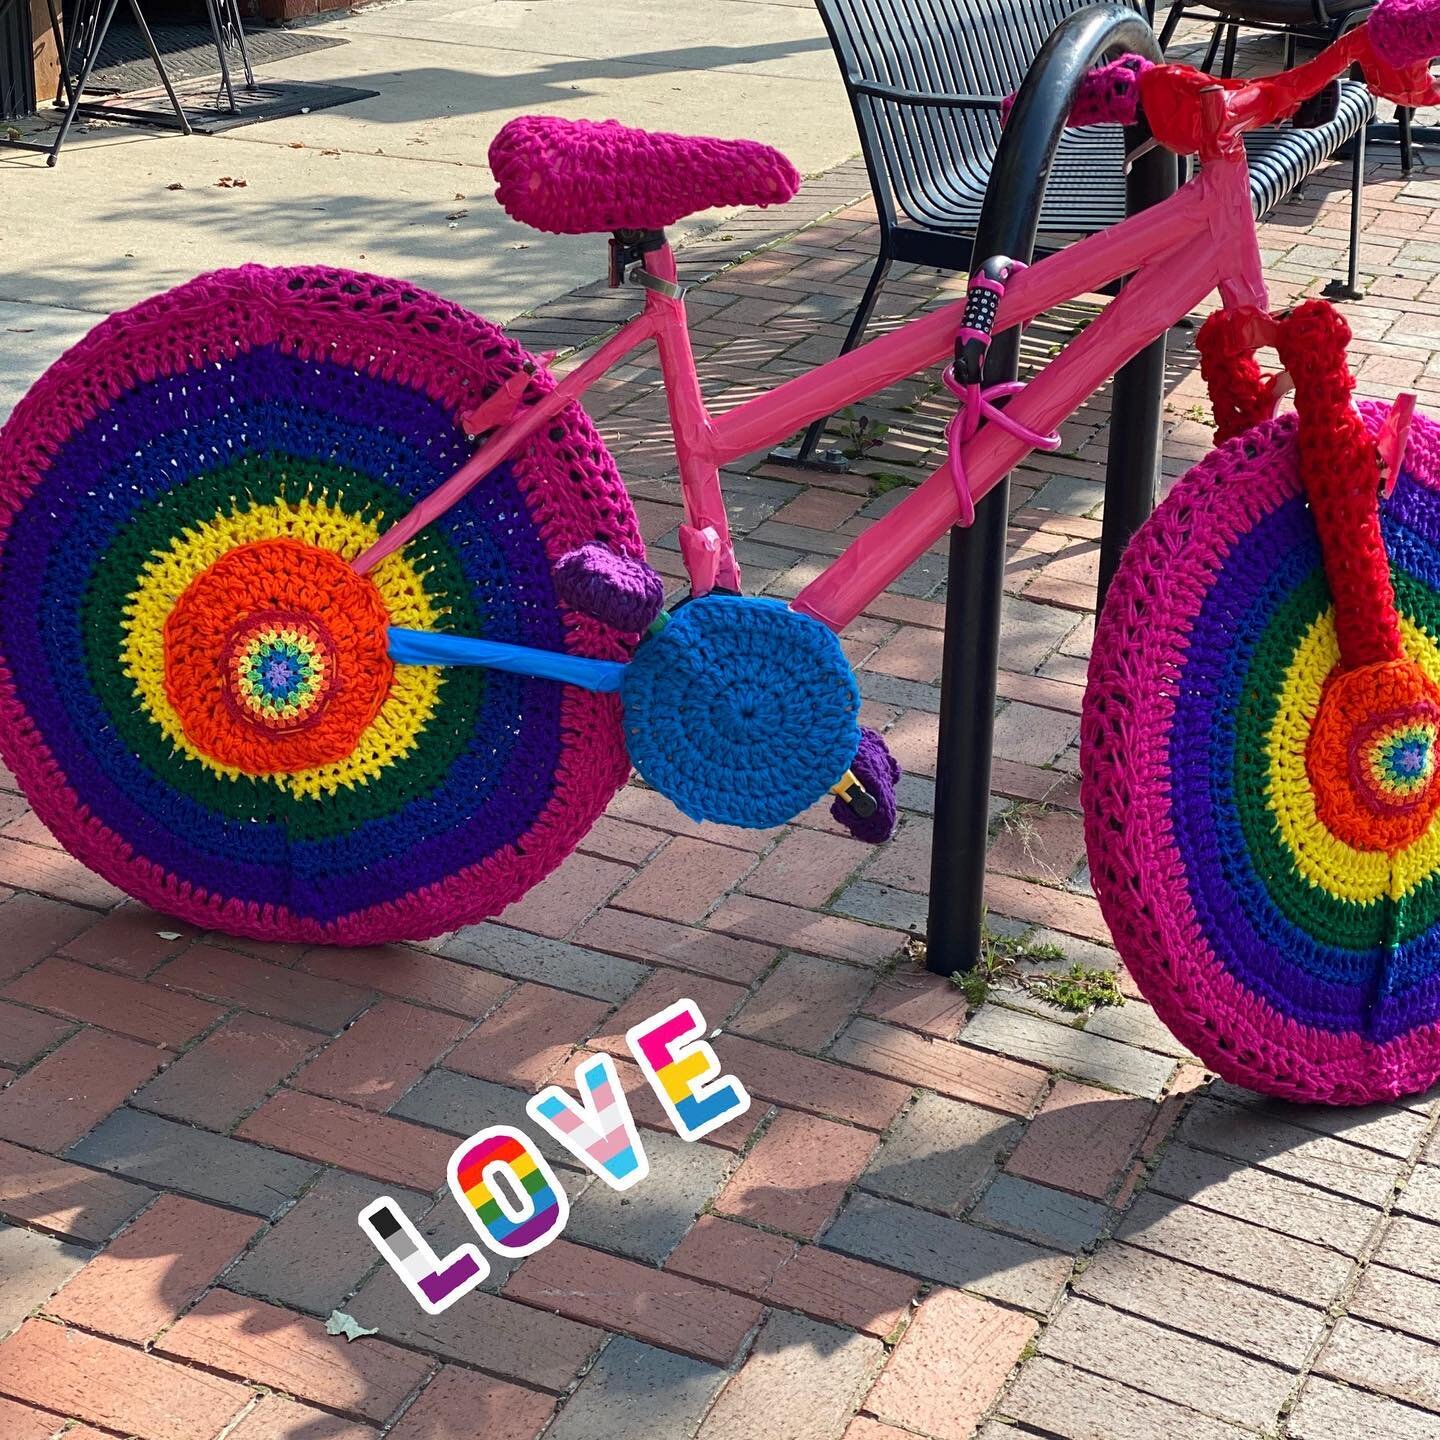 I did a thing.

Pride Bike I made and installed downtown.

#stitchandhustle #pridemonth #loveislove #liveyourlife #crochetbike #yarnbombing #crochet #art